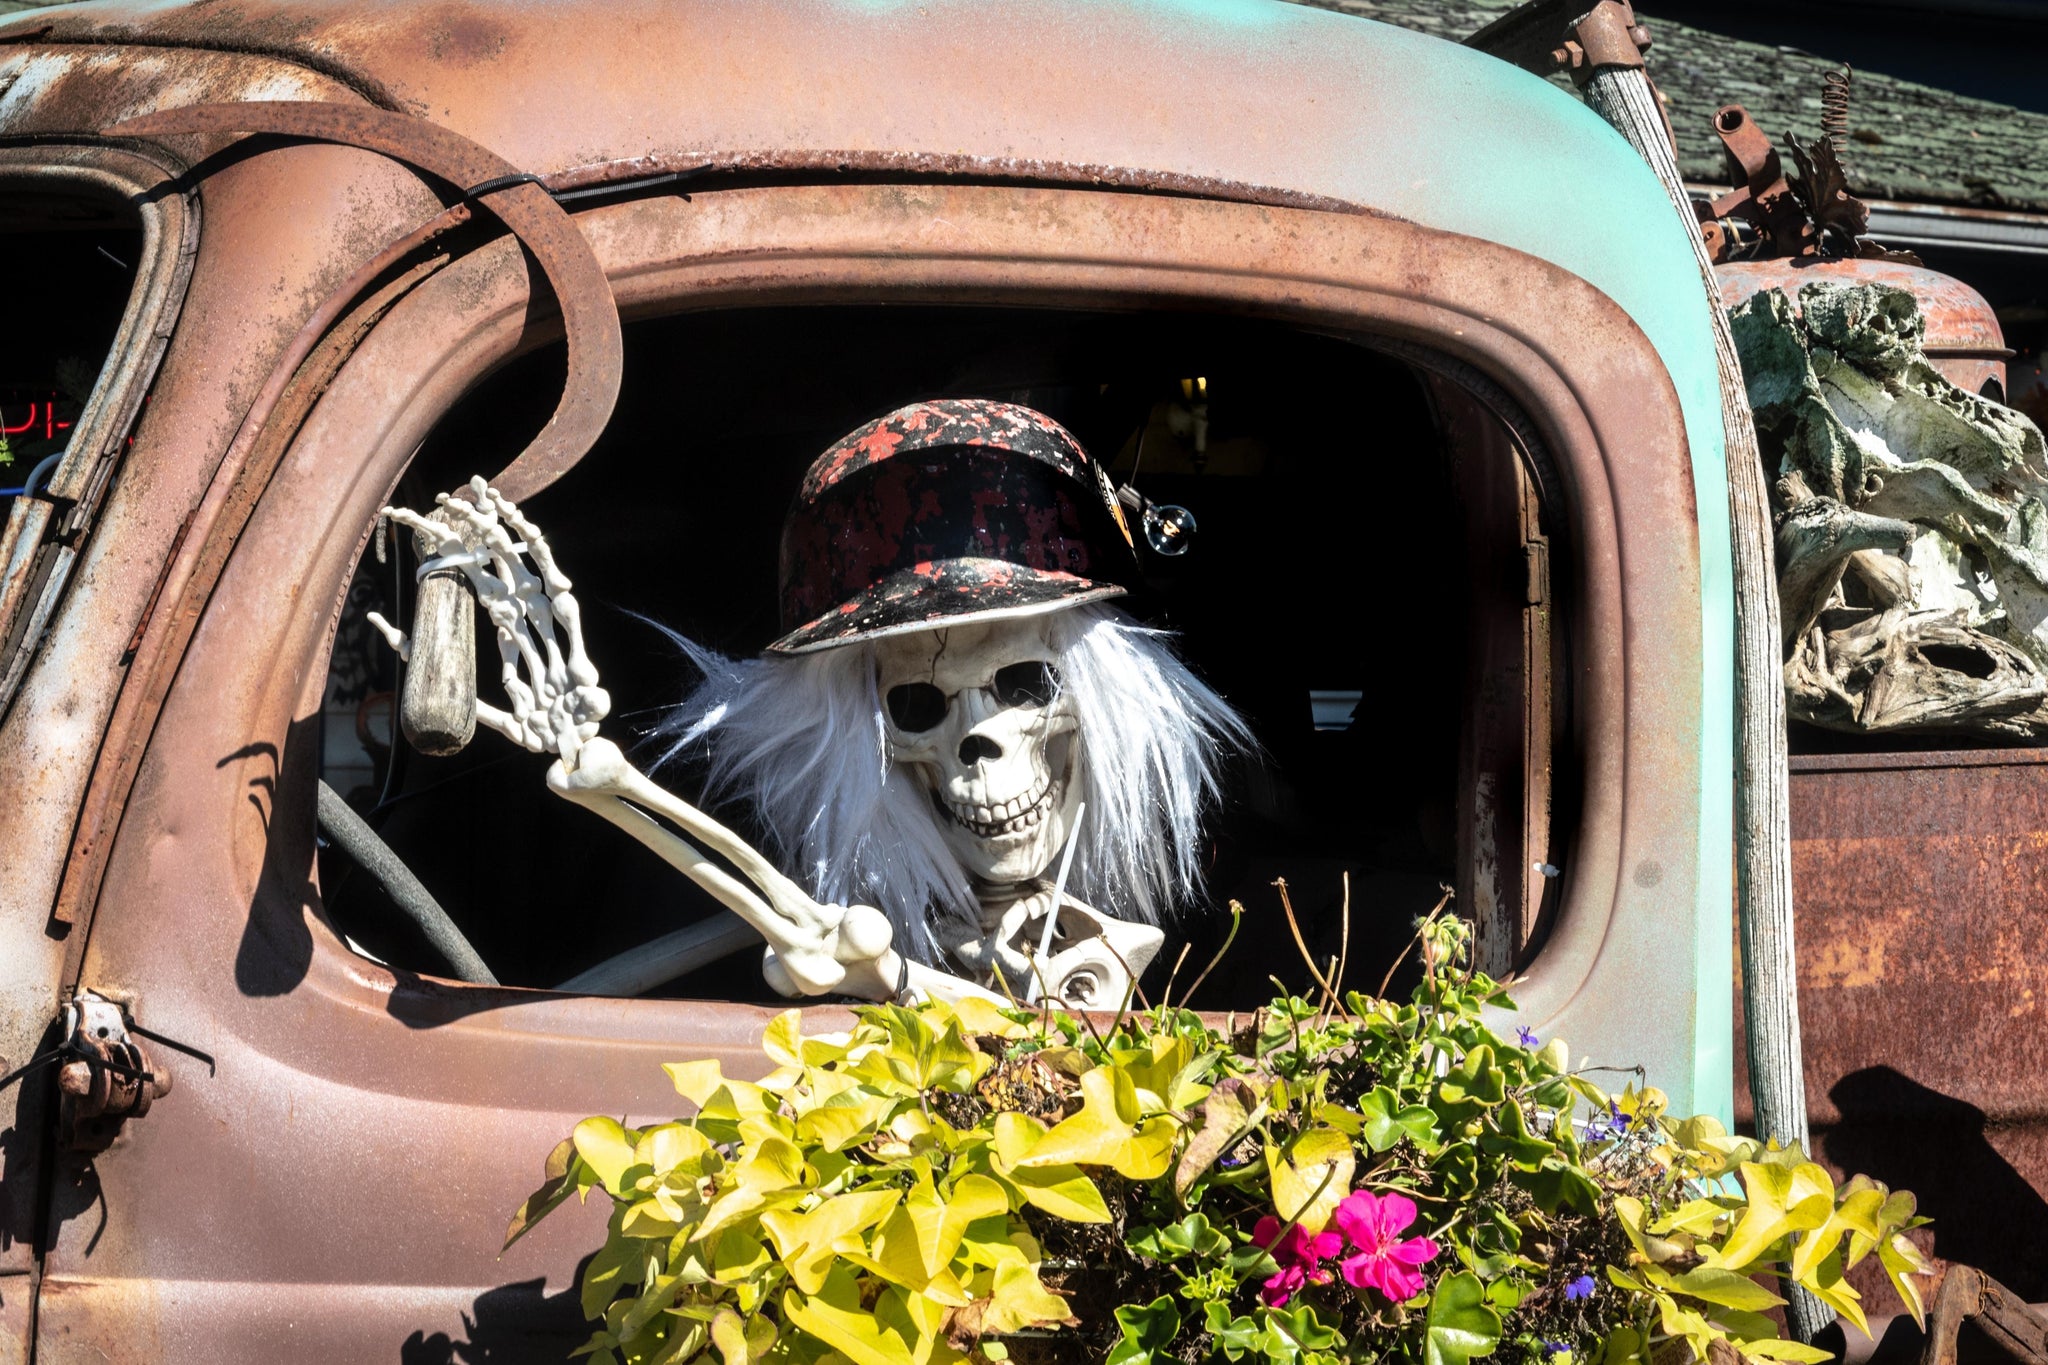 A skeleton in an old truck next to plants and flowers